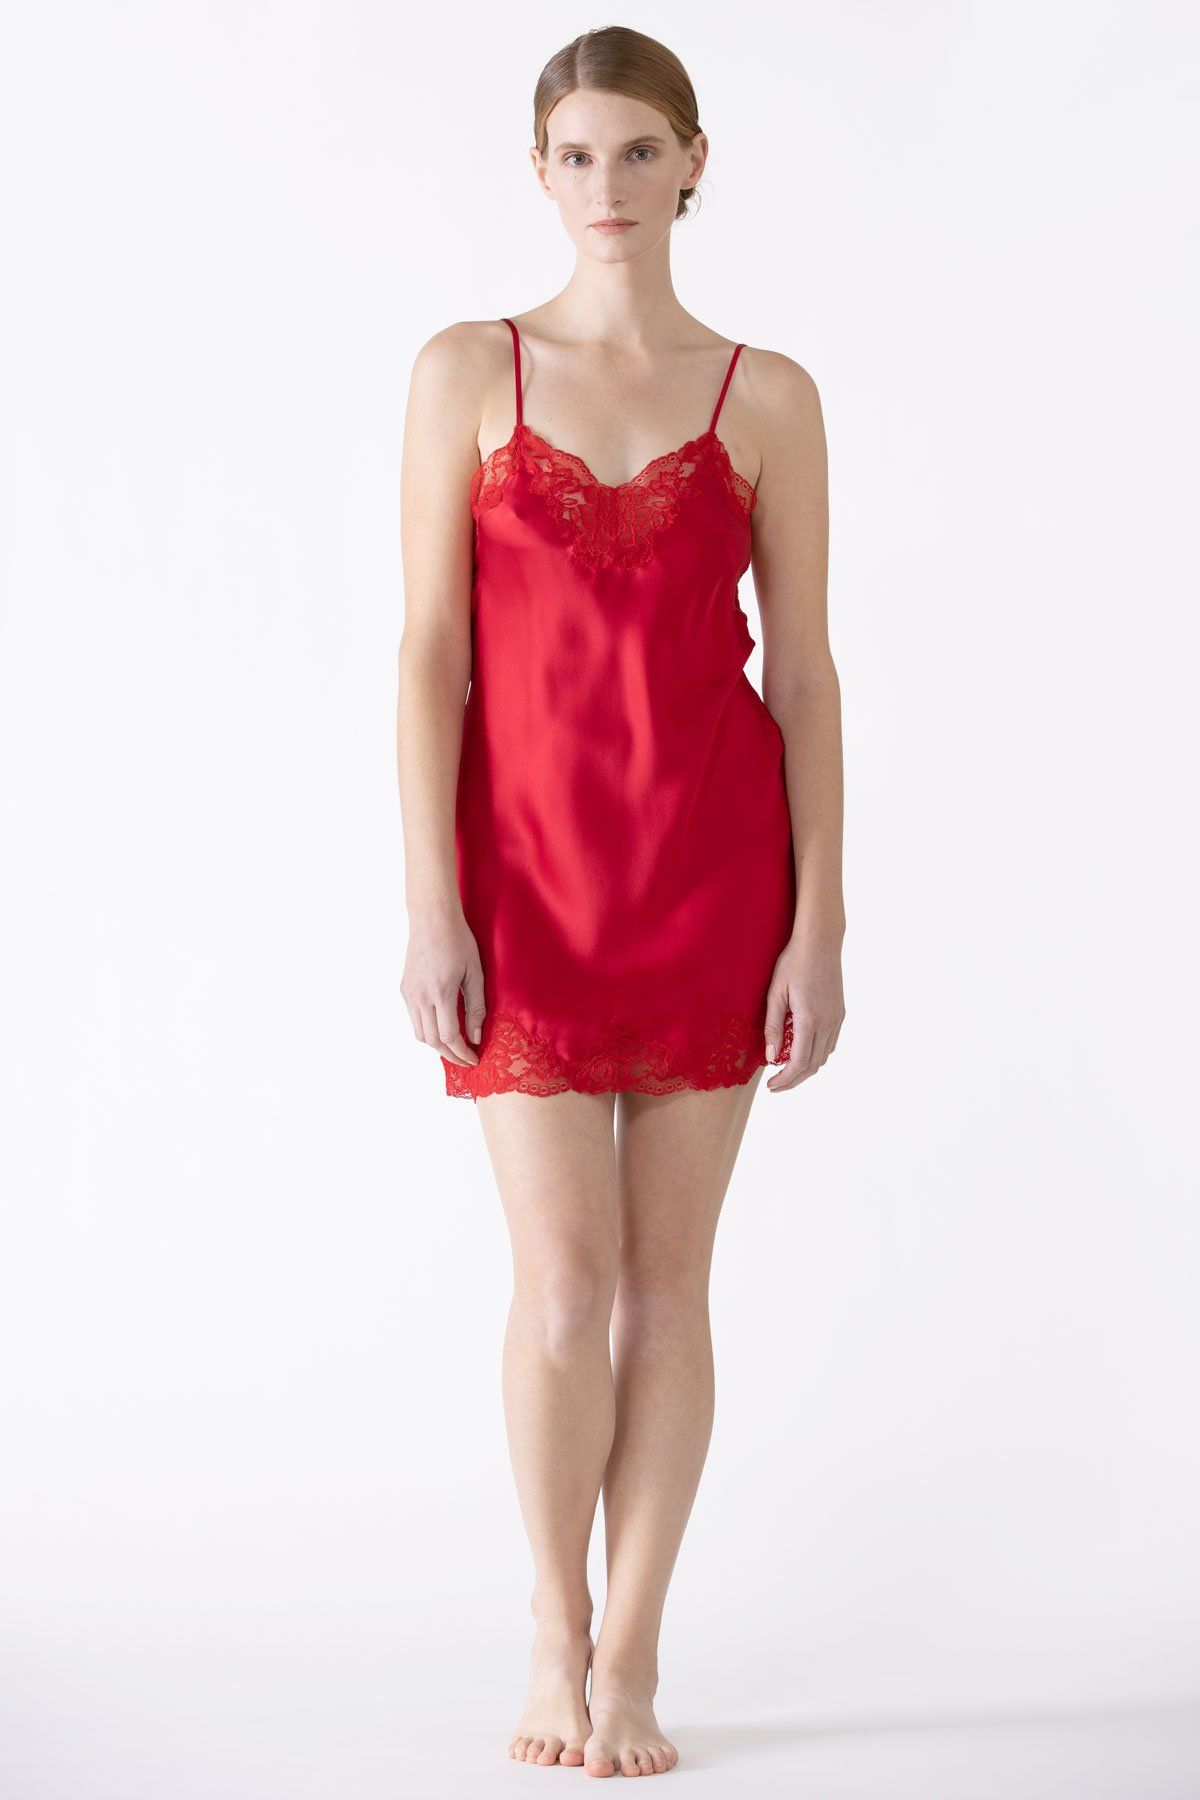 Morgan Lace Spaghetti Silk Chemise Chemise NK iMODE XS scarlet red